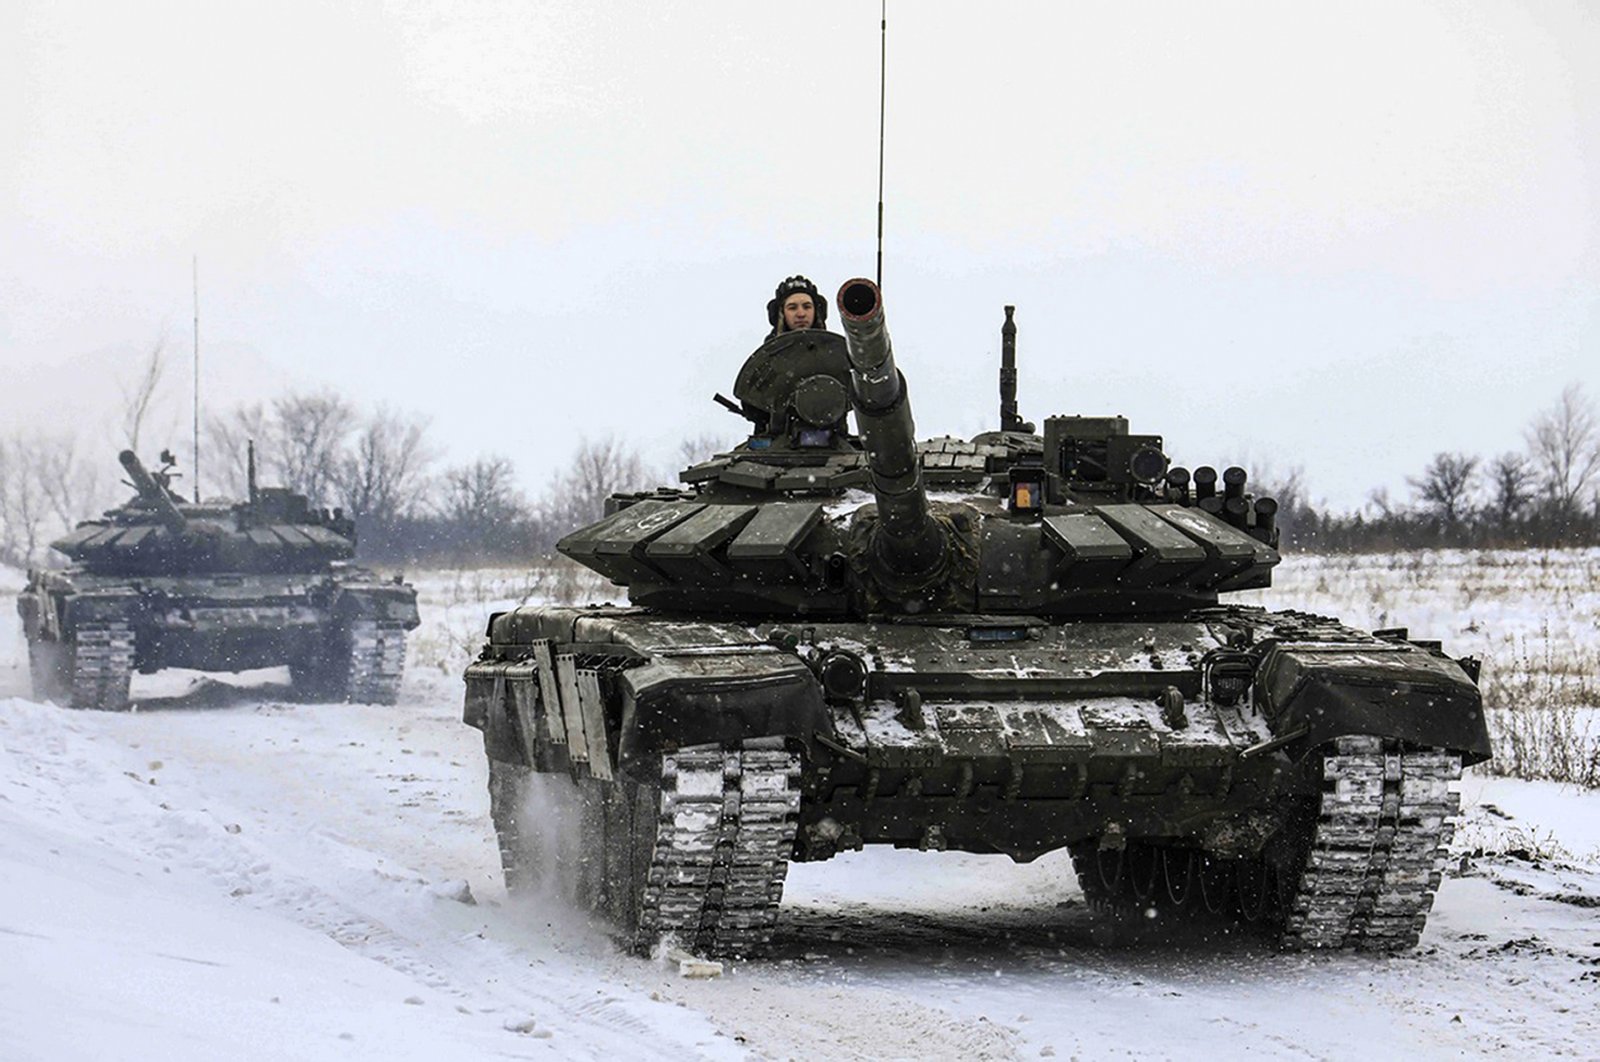 Russian tanks maneuver during a military drill in the Leningrad region, Russia, Feb. 14, 2022. (AP Photo)